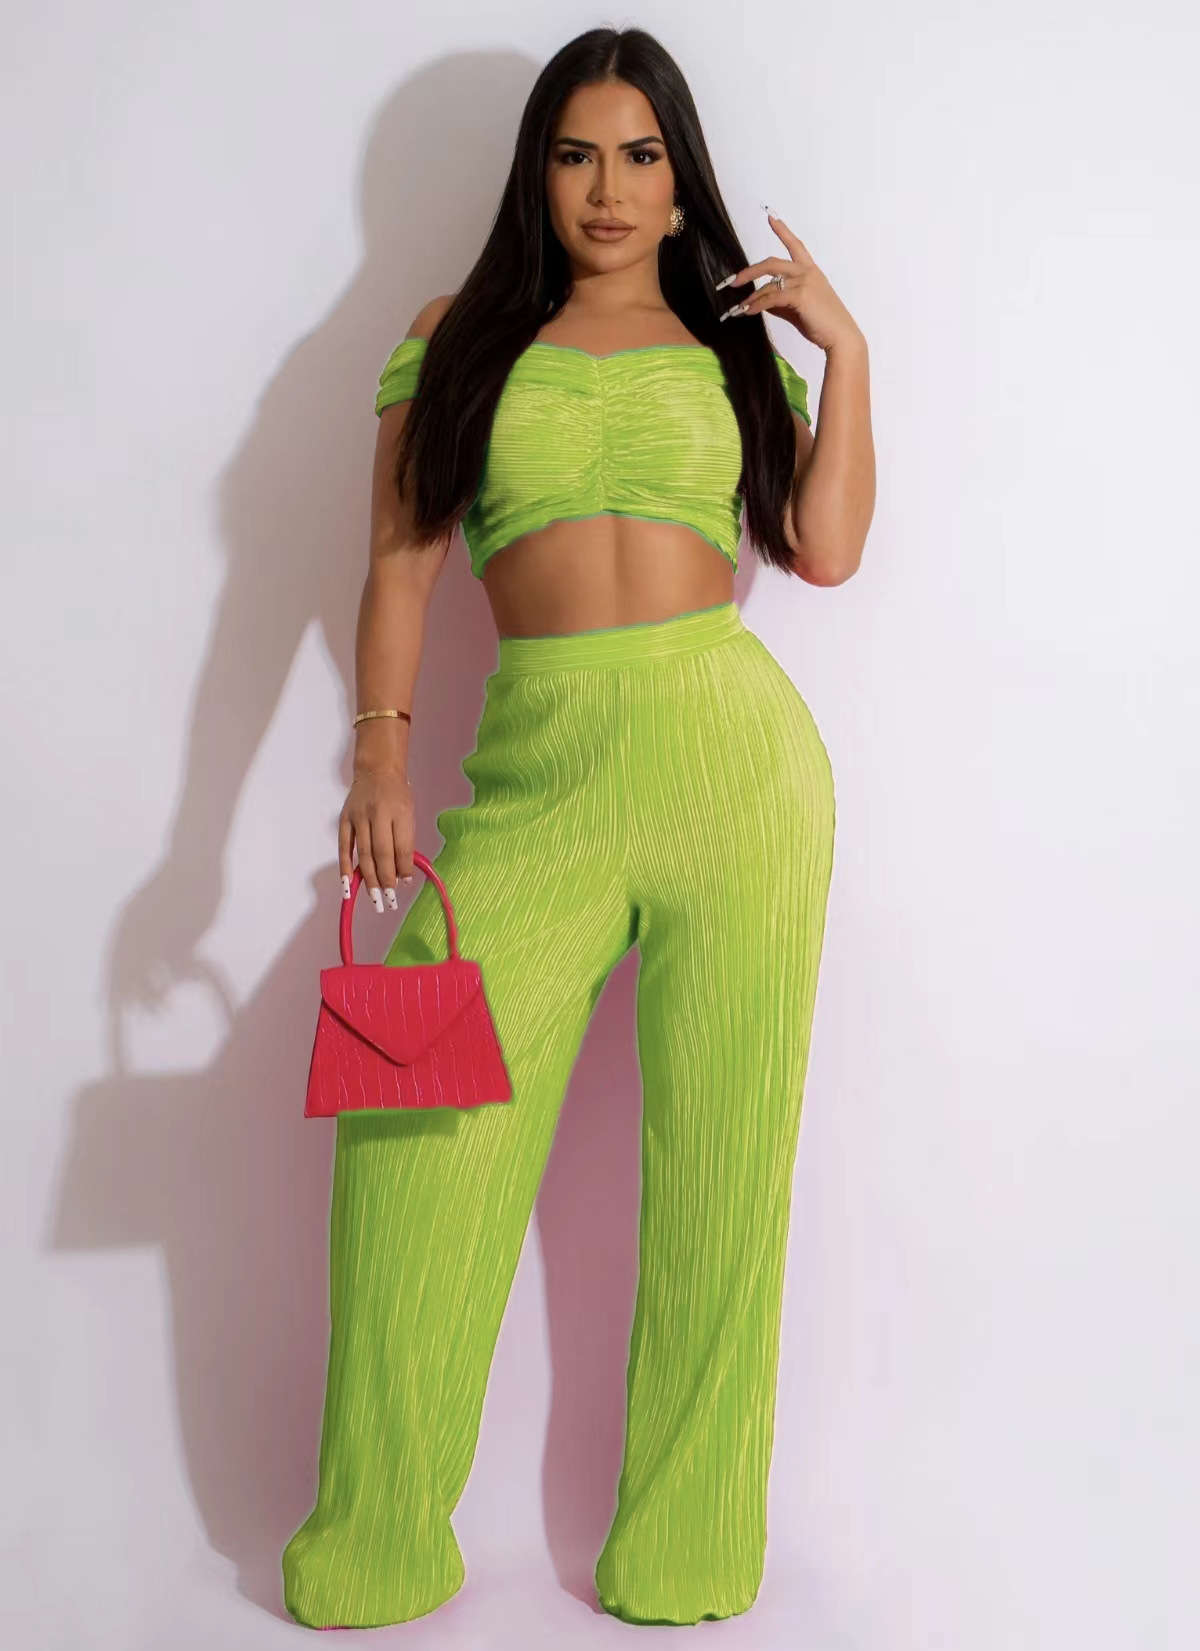 Neon Green Cargo Pants With Simenual Pockets High Waist Streetwear Ladies  Cargo Trousers Primark For Women, Oversized Fit, 2019 Spring Sweatpants  Fashionable T200727 From Linmei0004, $15.79 | DHgate.Com